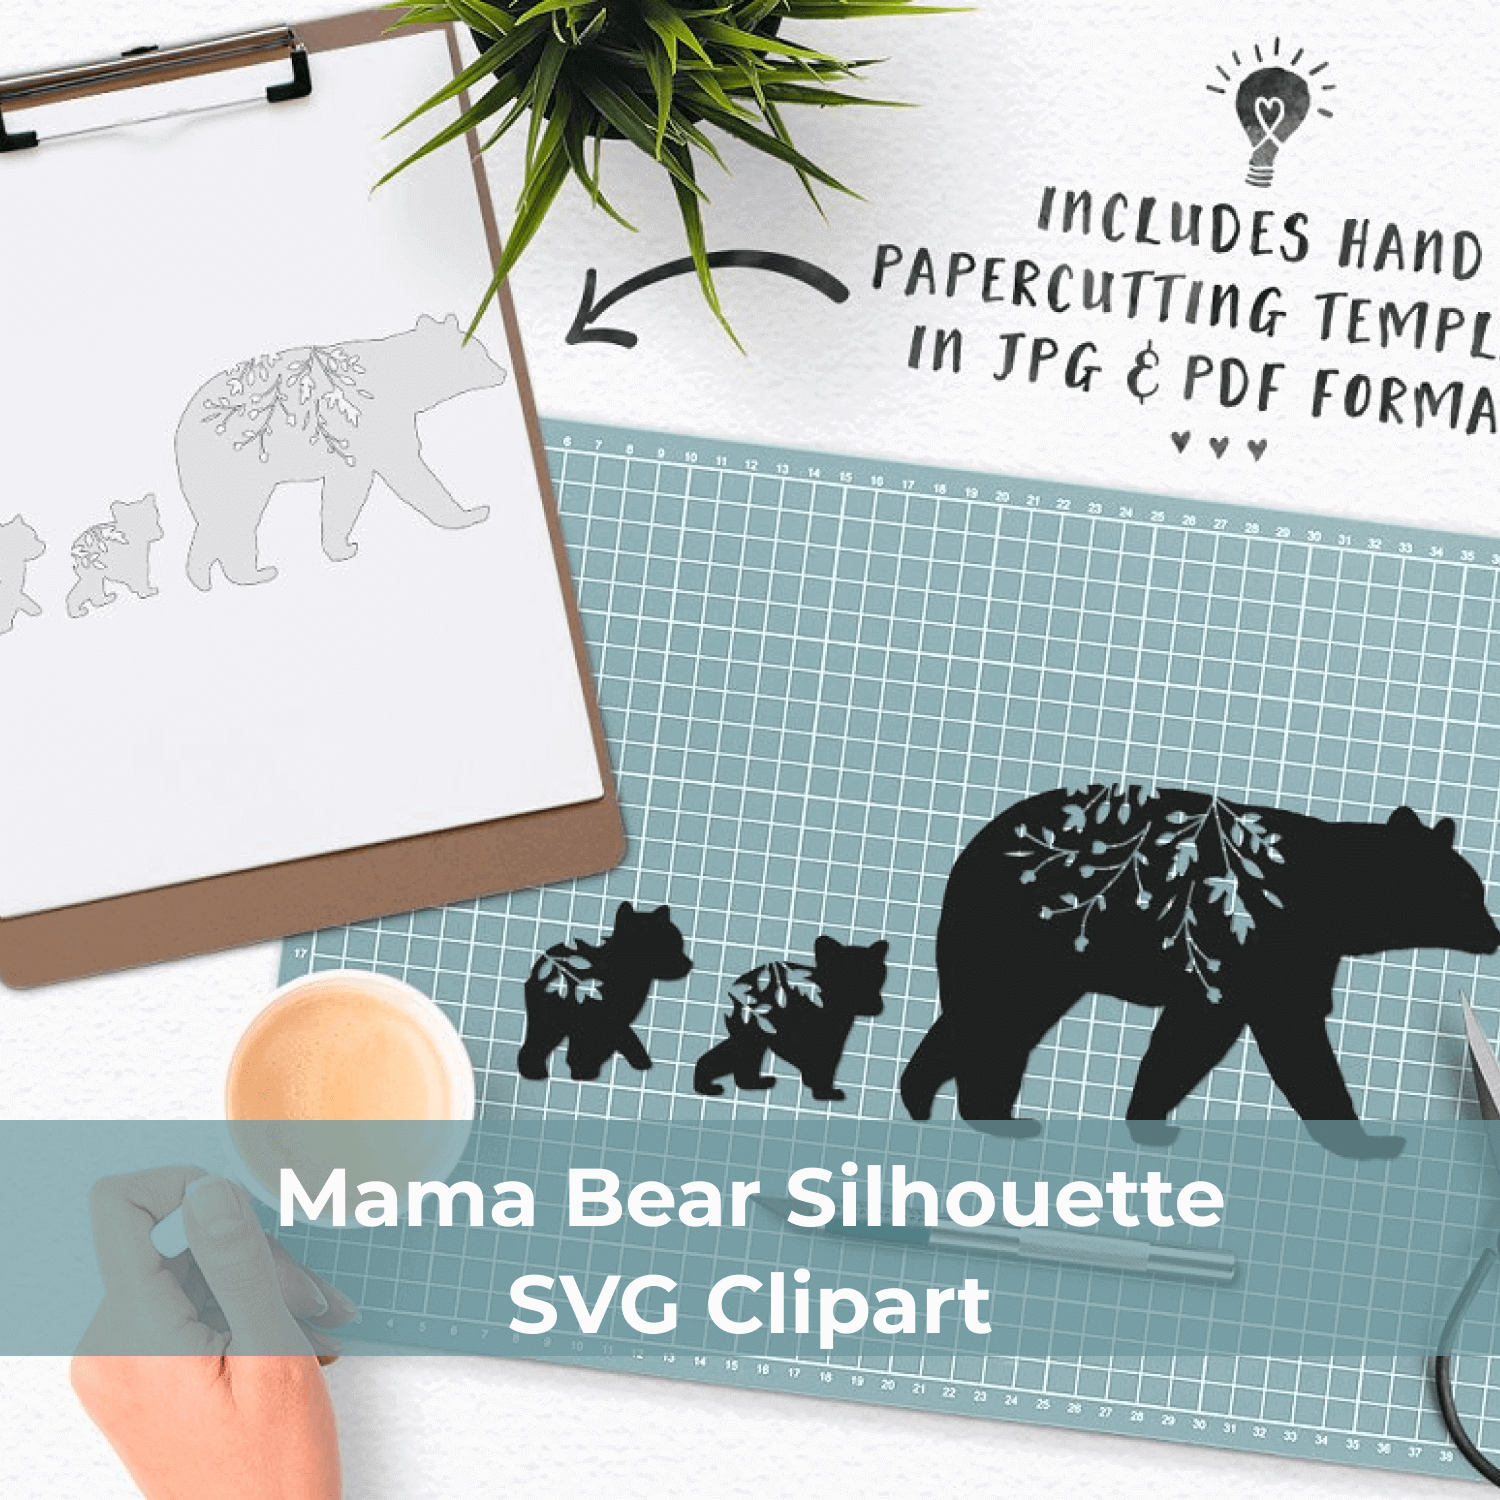 Picture of a mama bear silhouette with a clipboard next to it.